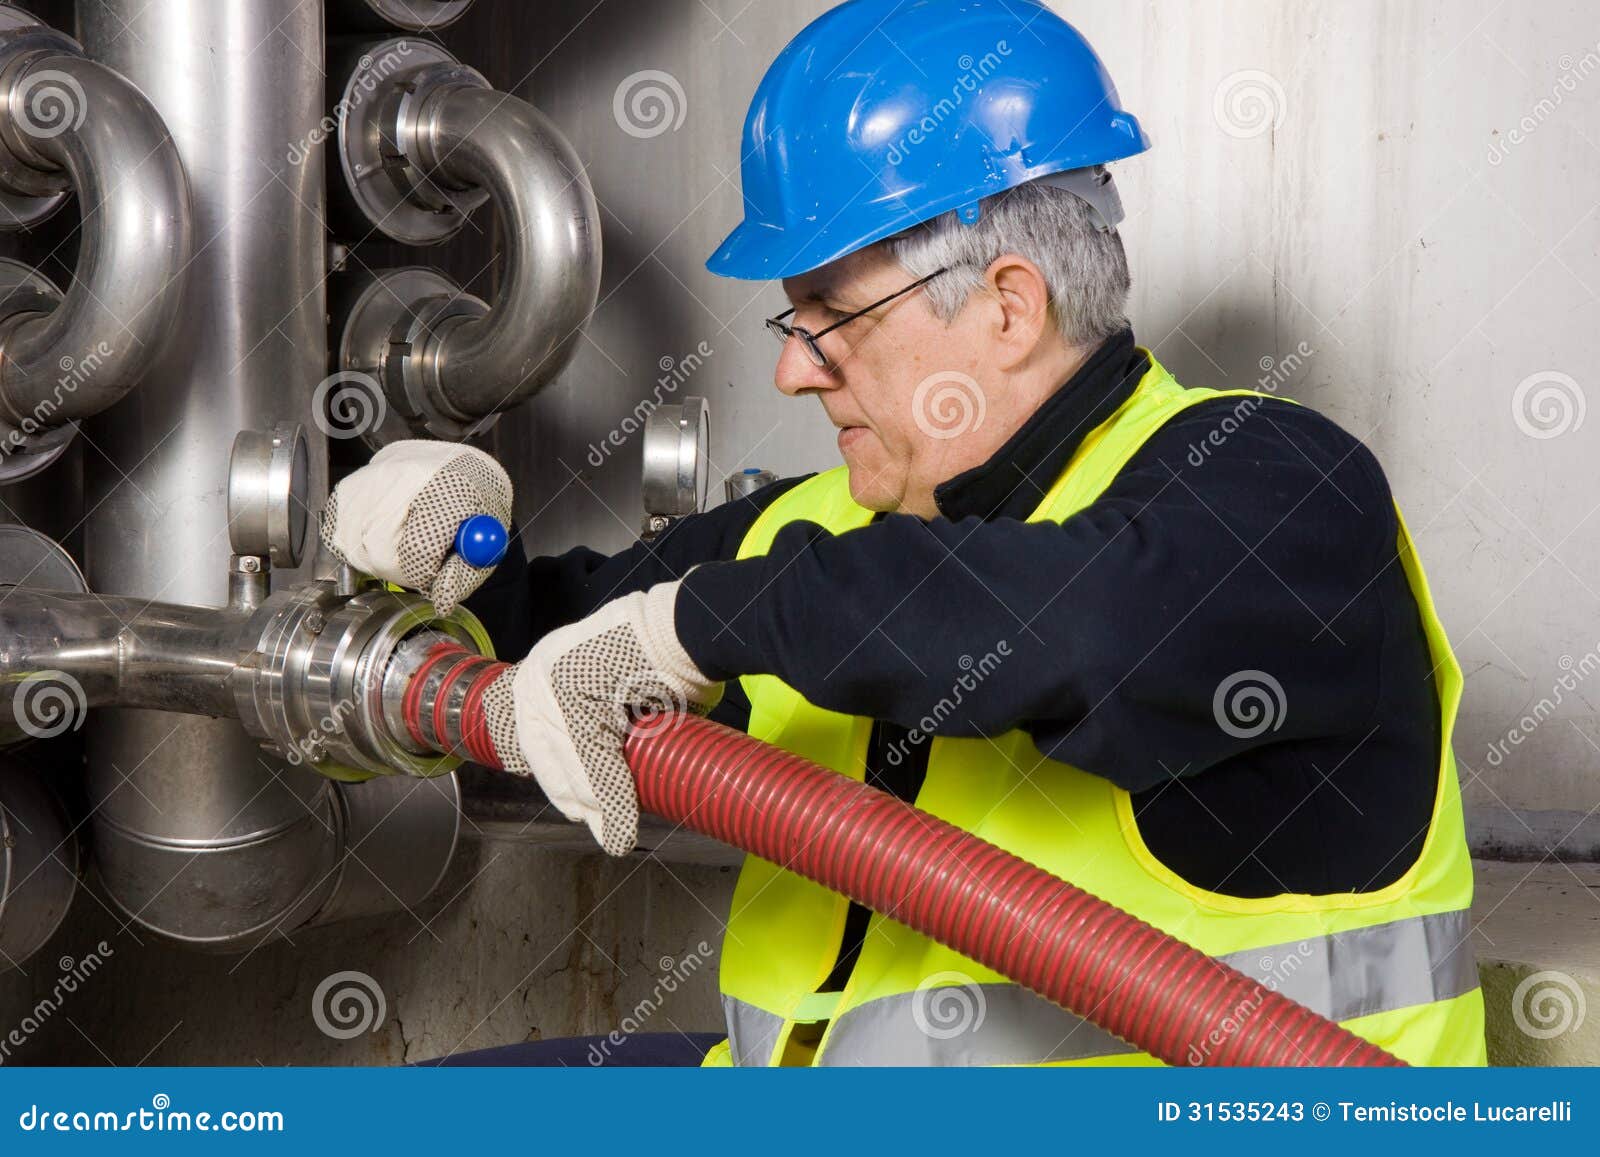 Pipeline craftsman stock image. Image of mechanical, electrical - 31535243